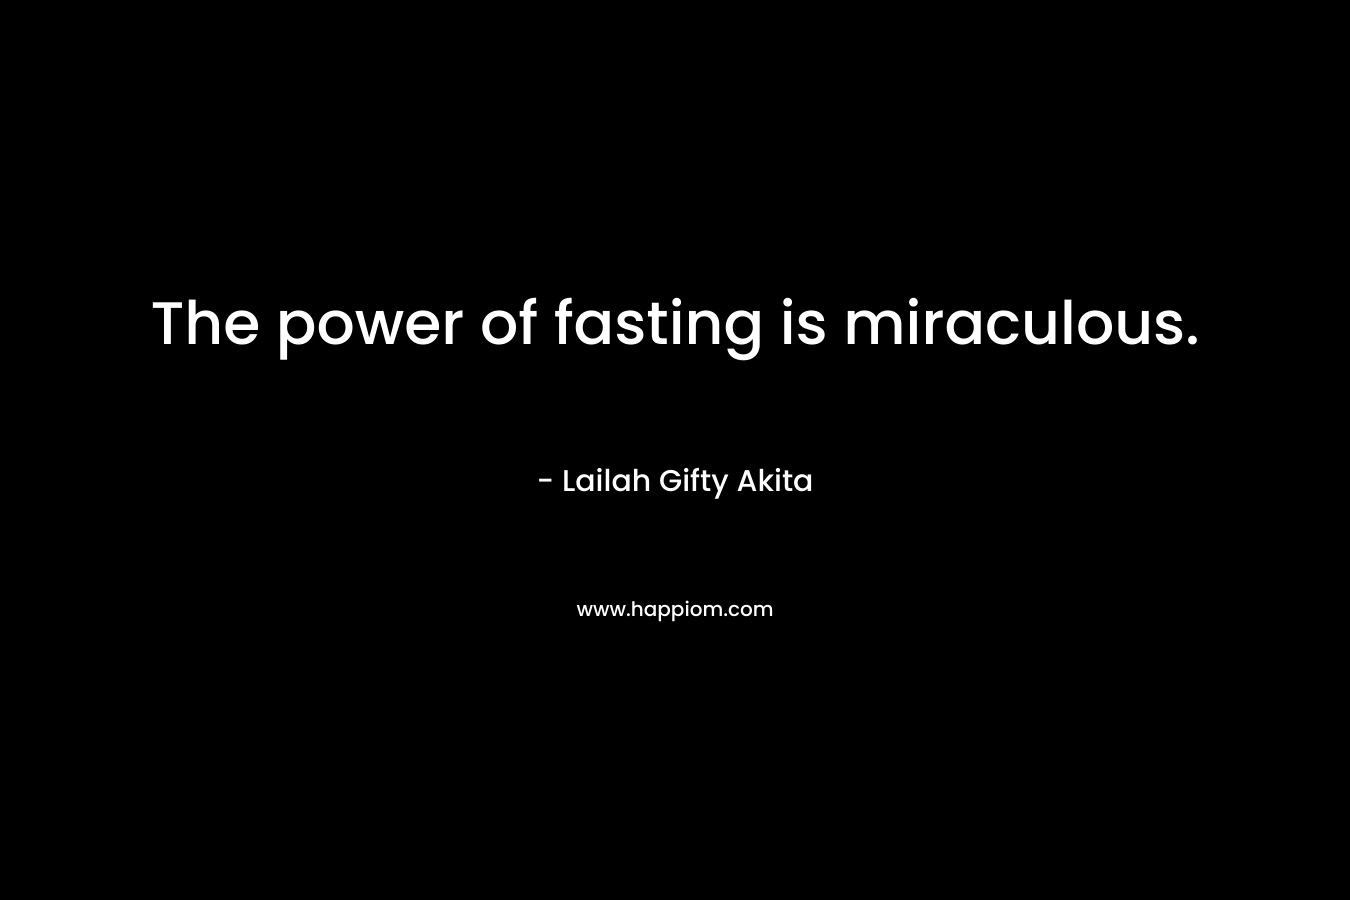 The power of fasting is miraculous.